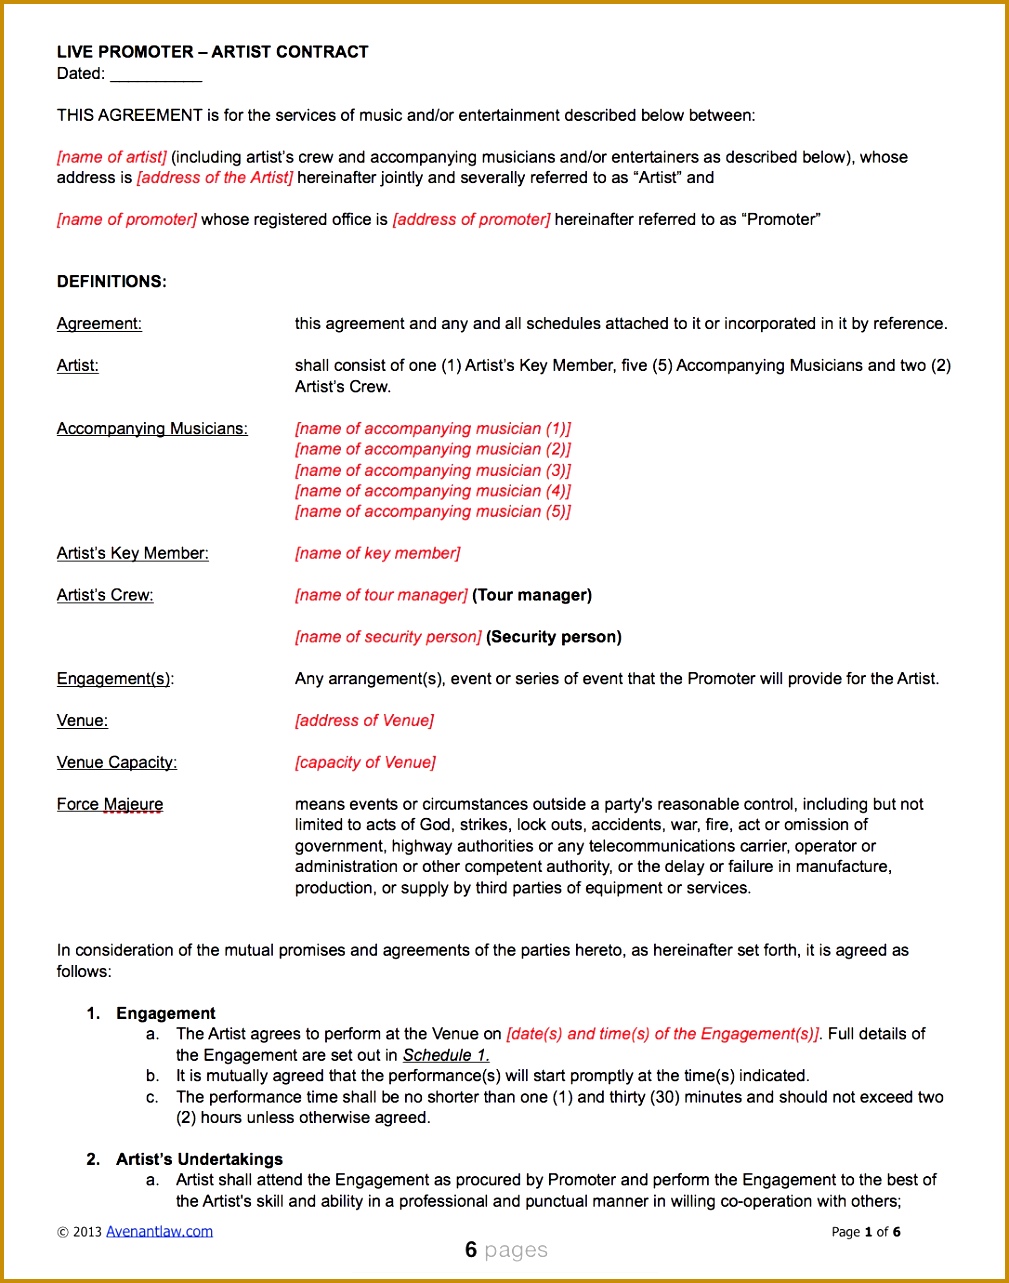 Business Contracts Artist Contract Business Format For Cover Live Promoter Artist Contract Template In Artist Agreement 10091283